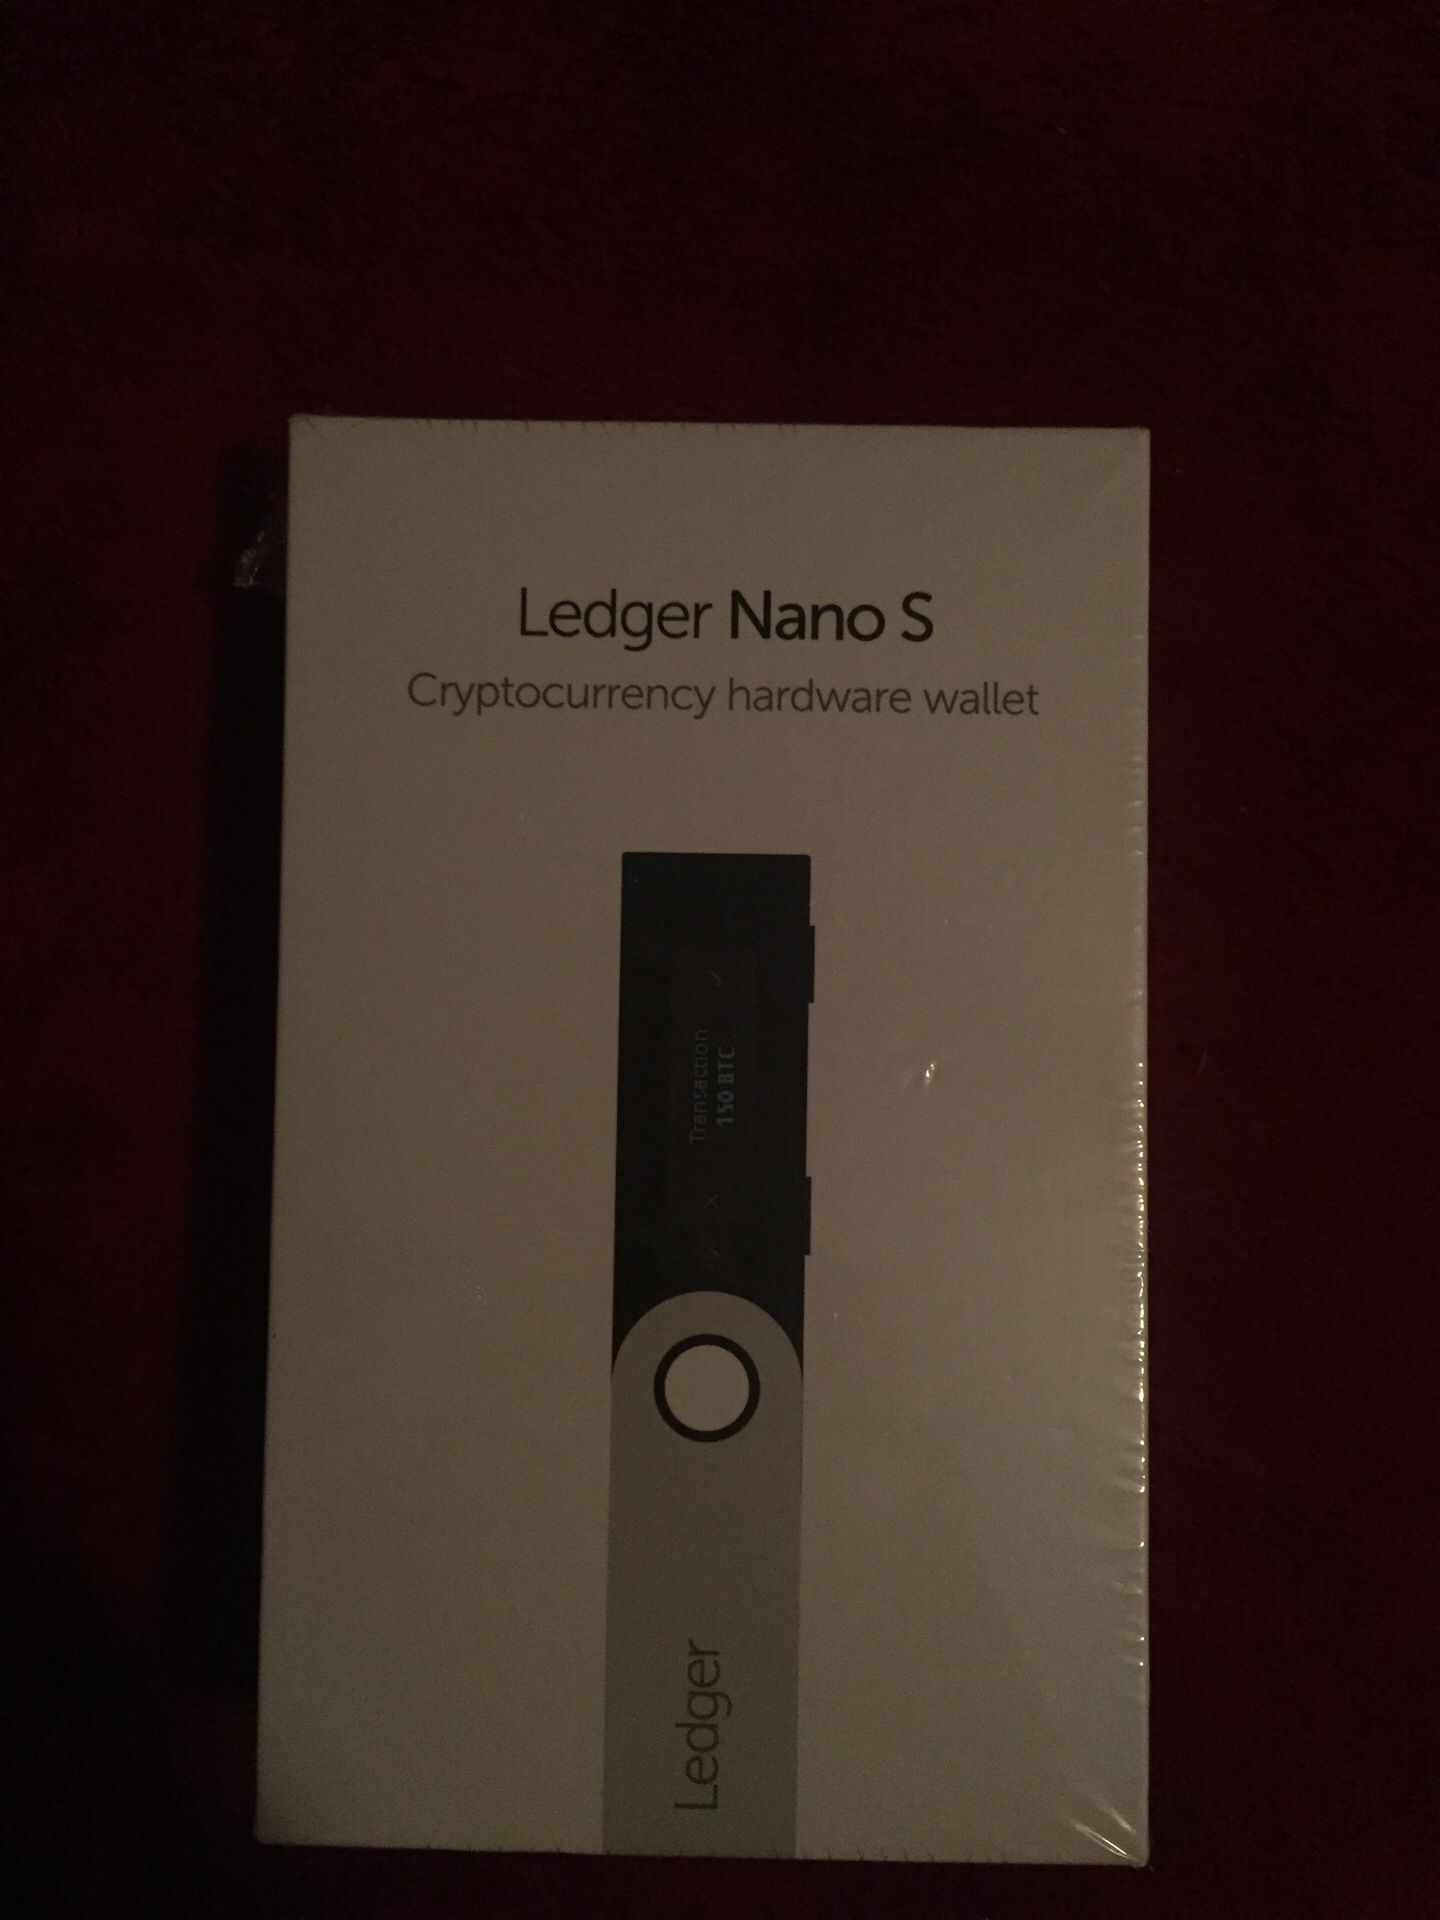 Ledger Nano S Cryptocurrency Wallet